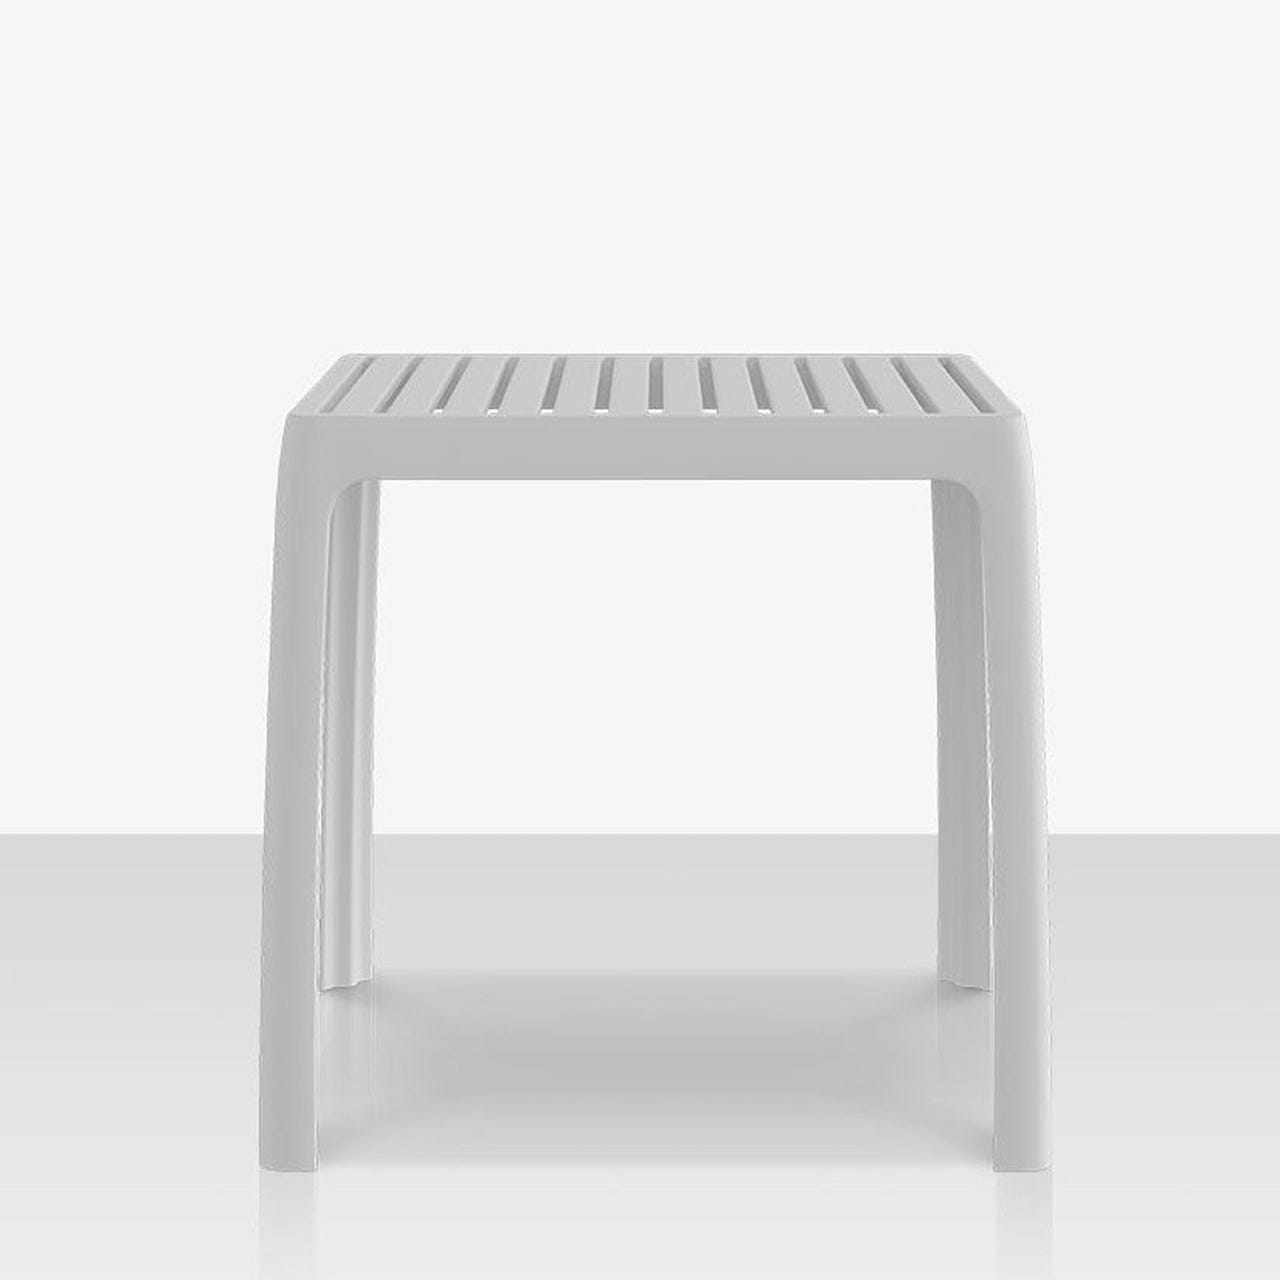 WAVE Side Table